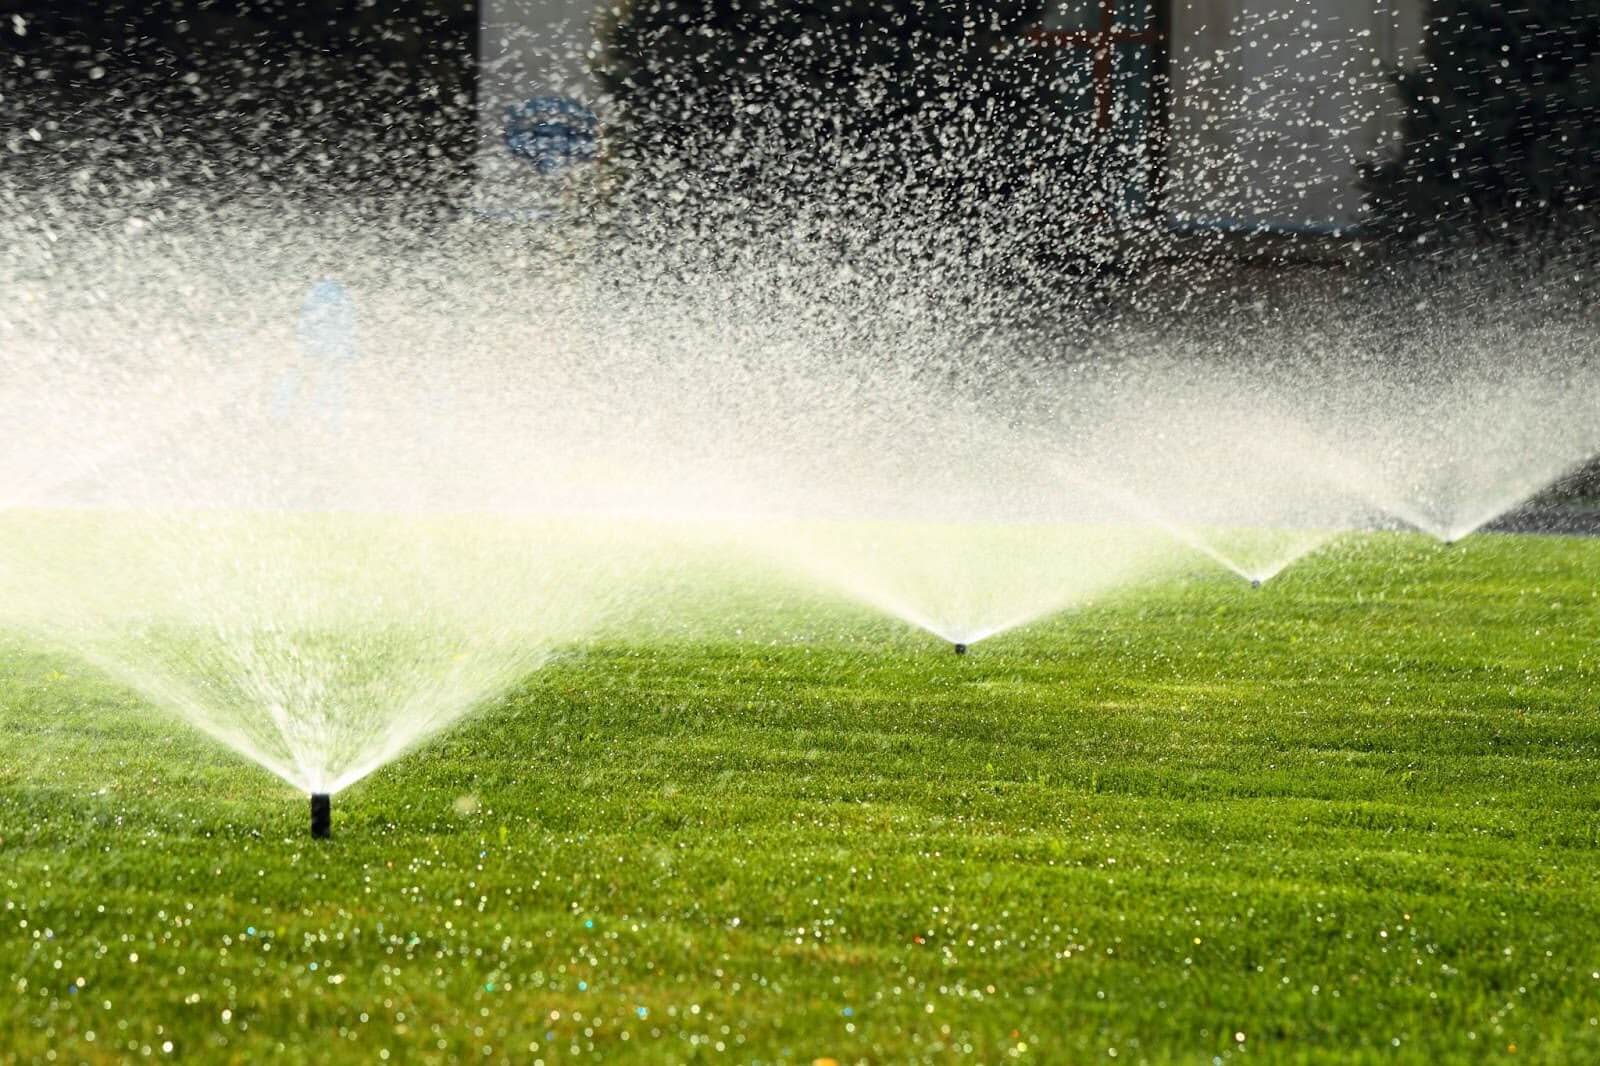 Irrigation system on a lawn.